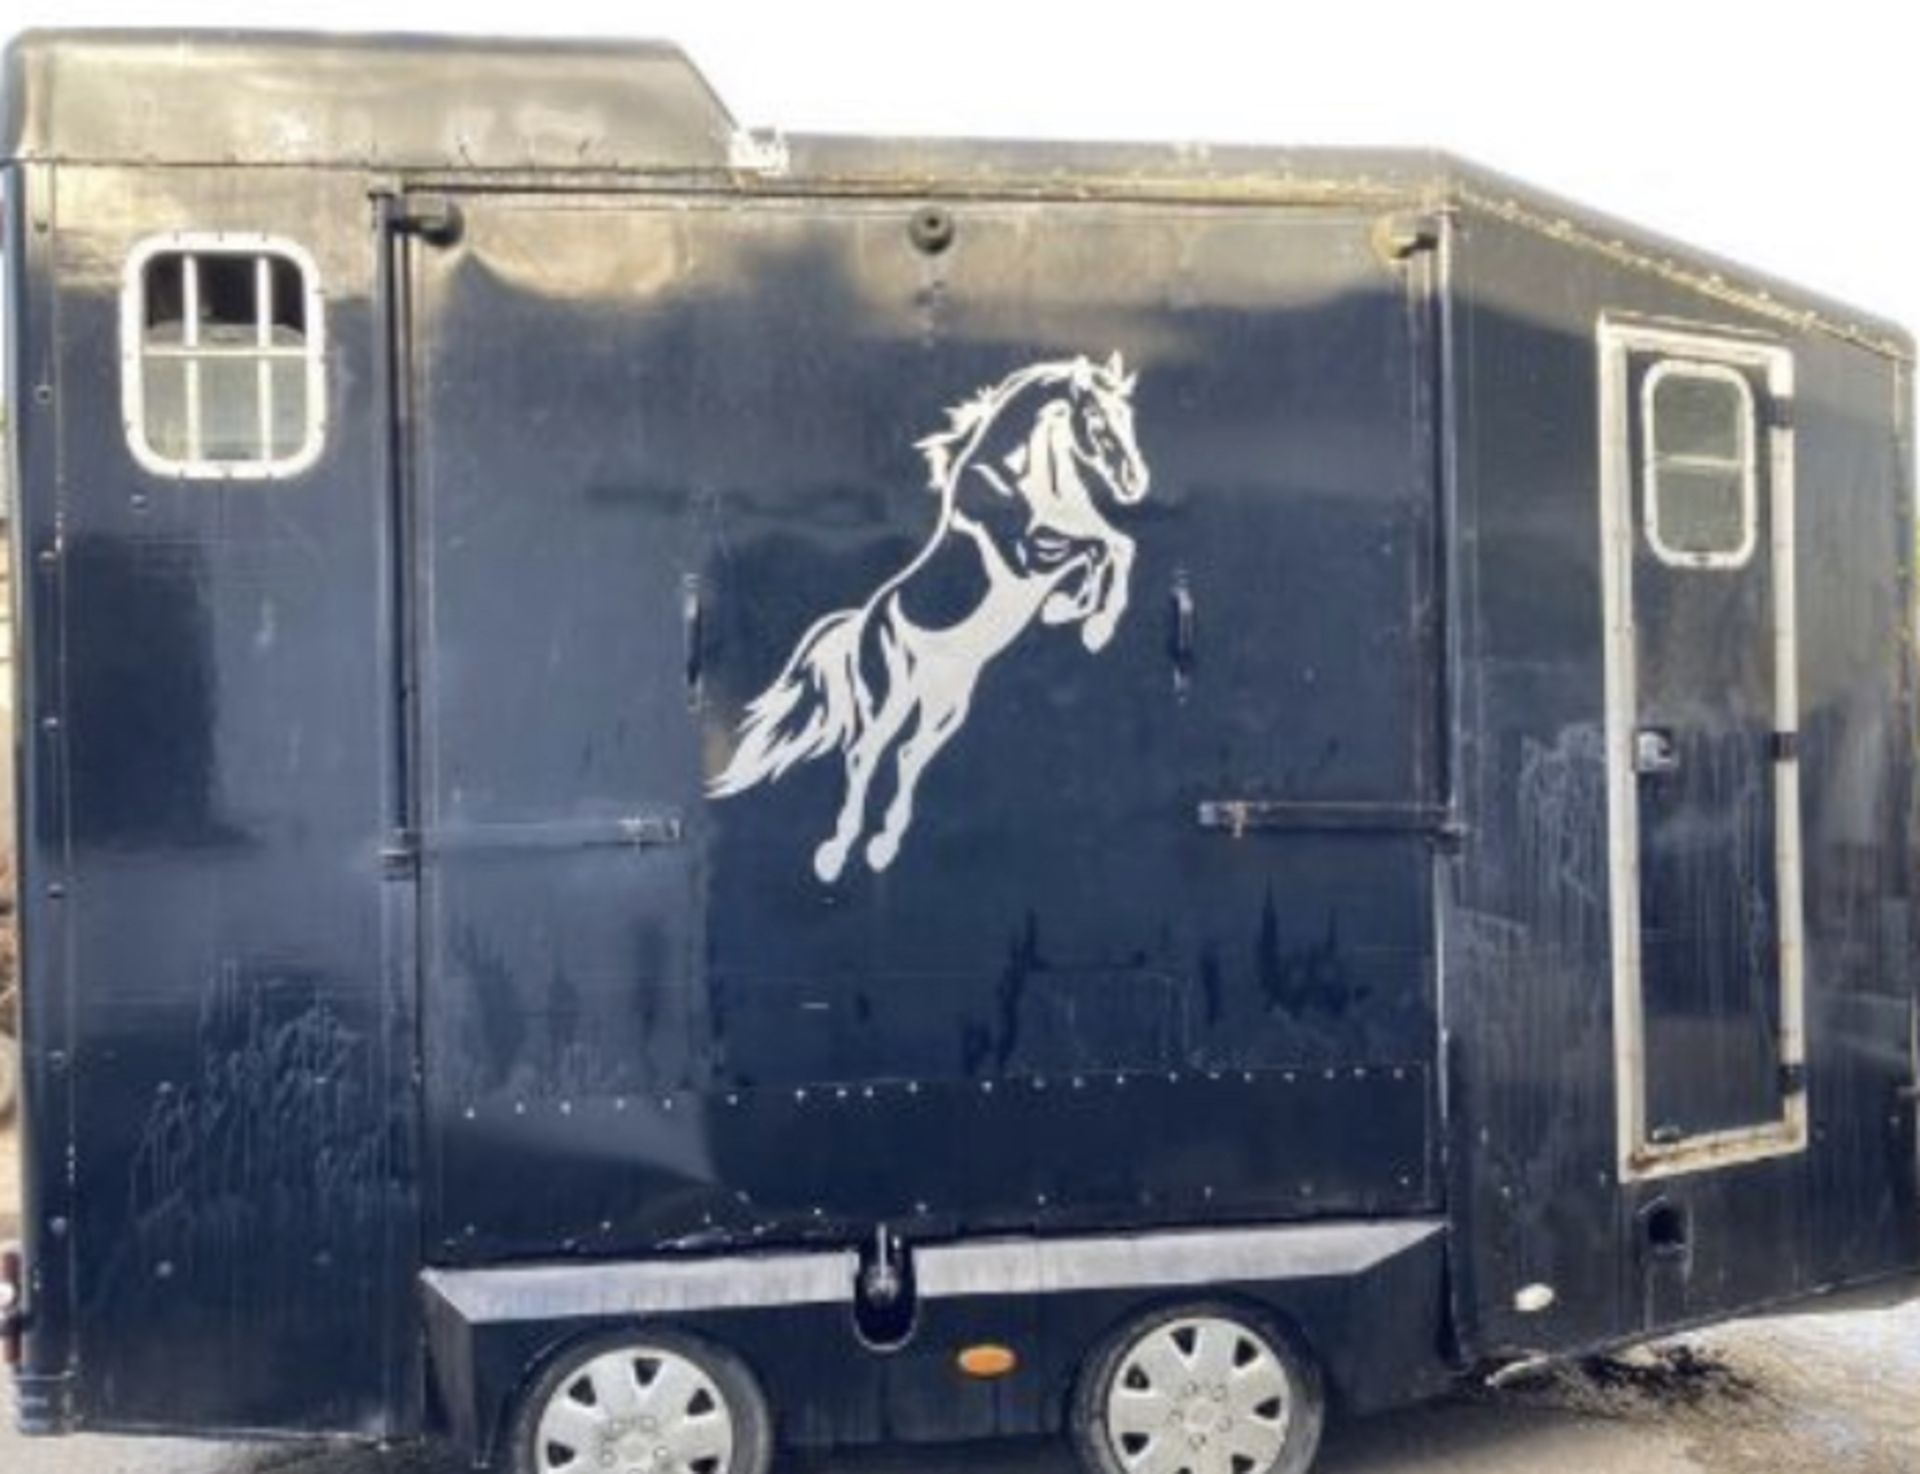 EQUITREK 2 HORSEBOX WITH DAY LIVING PARTITION. LOCATION: N.IRELAND - Image 2 of 10